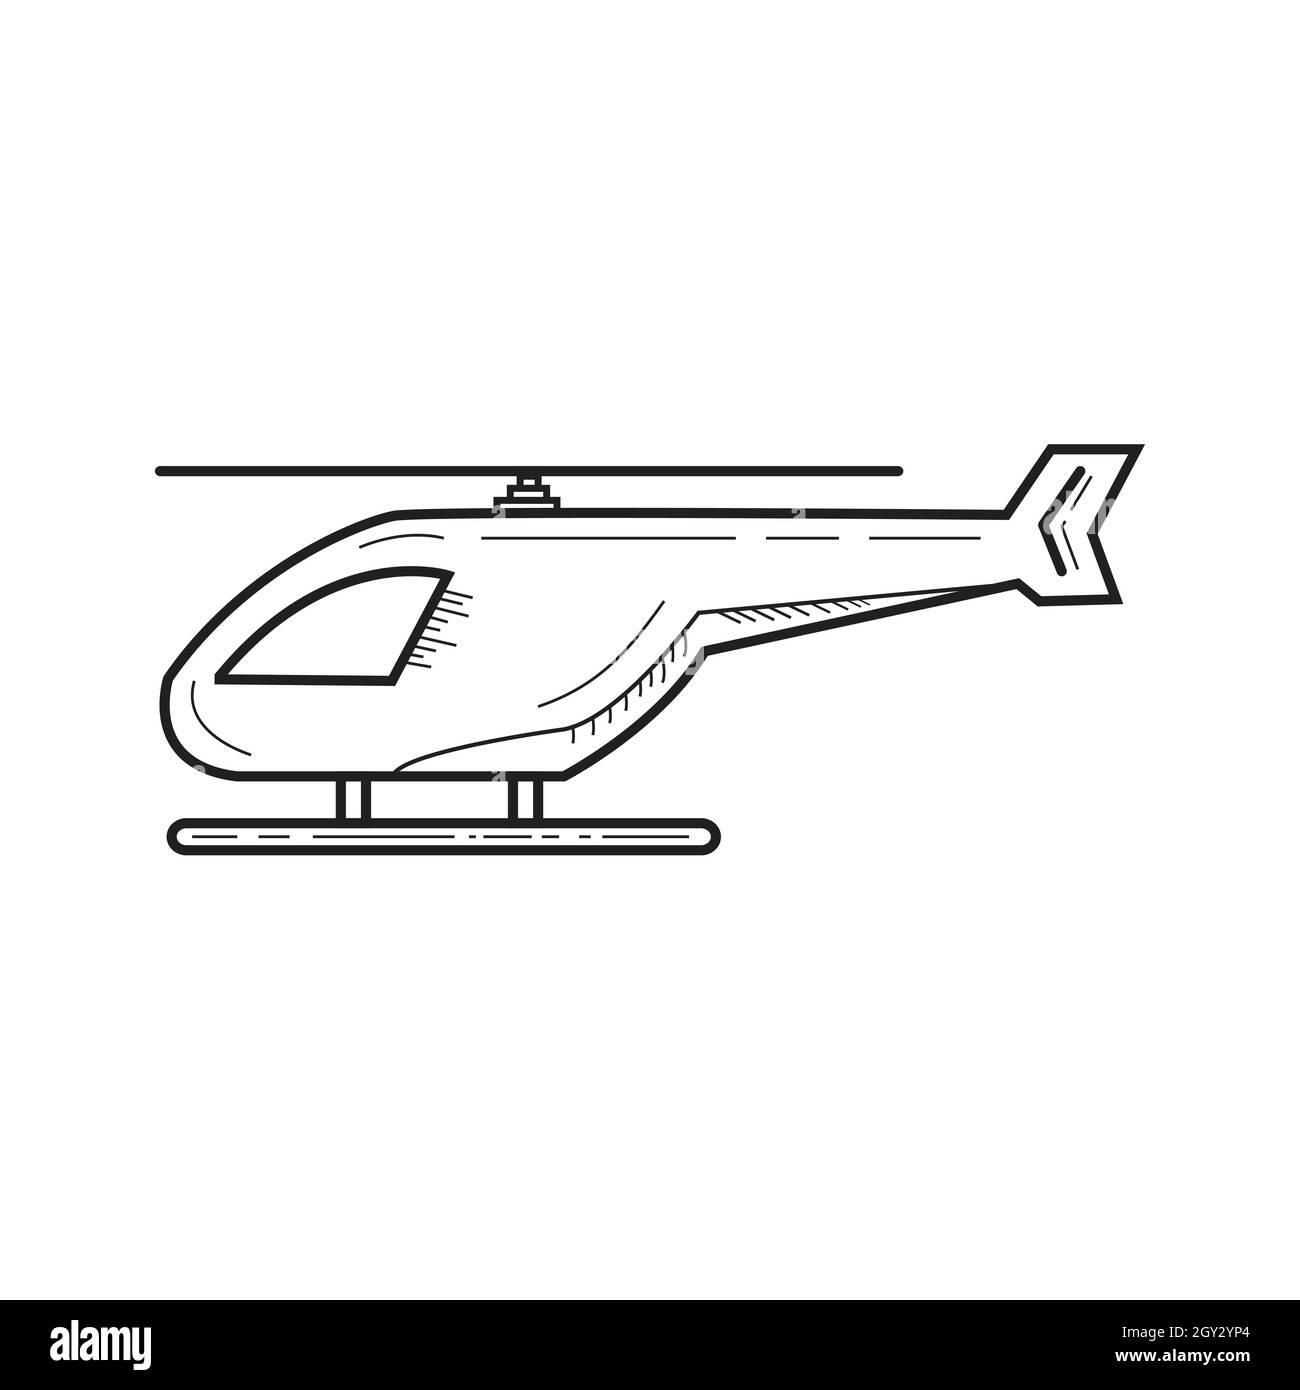 the helicopter vector illustration with white background Stock Vector